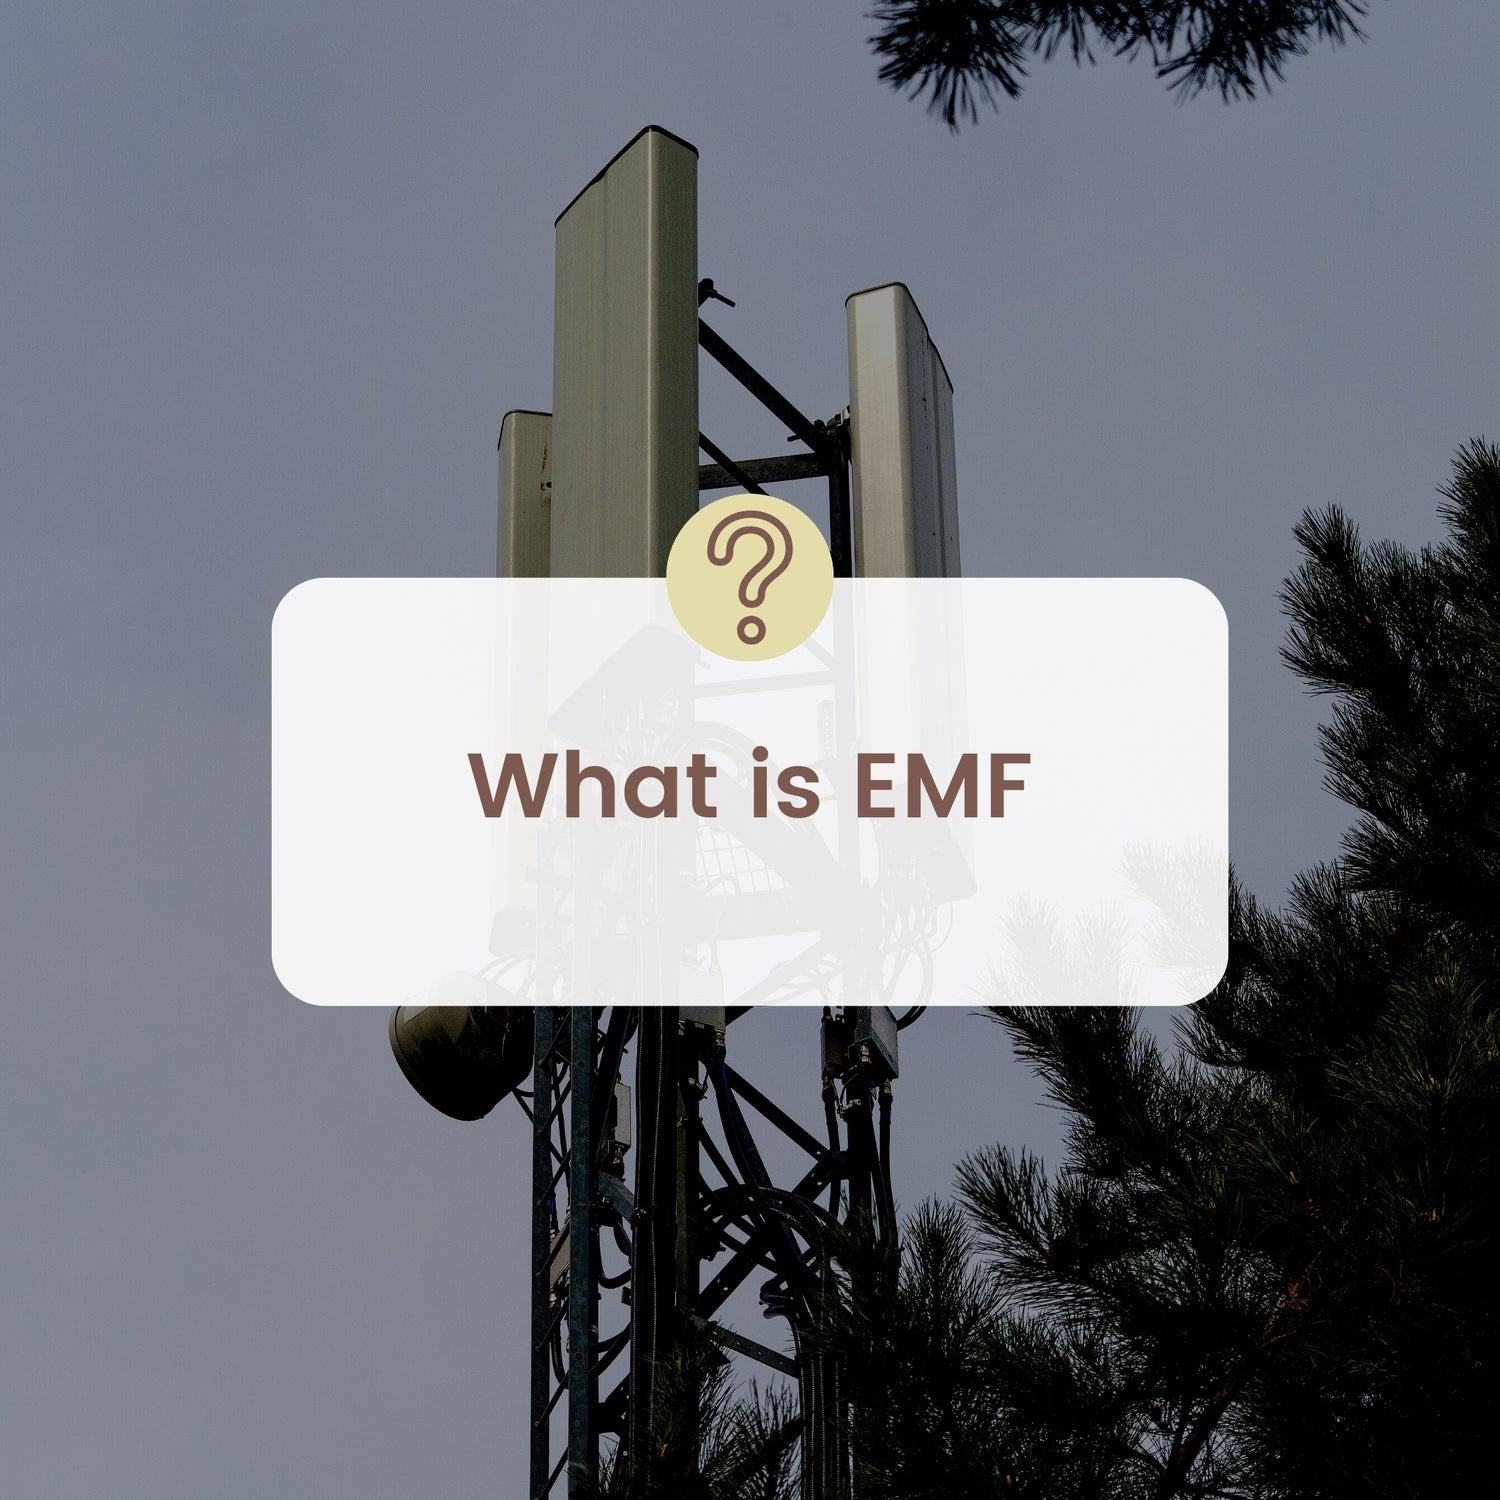 a 5g cell tower with the words 'what is emf' in a speech bubble